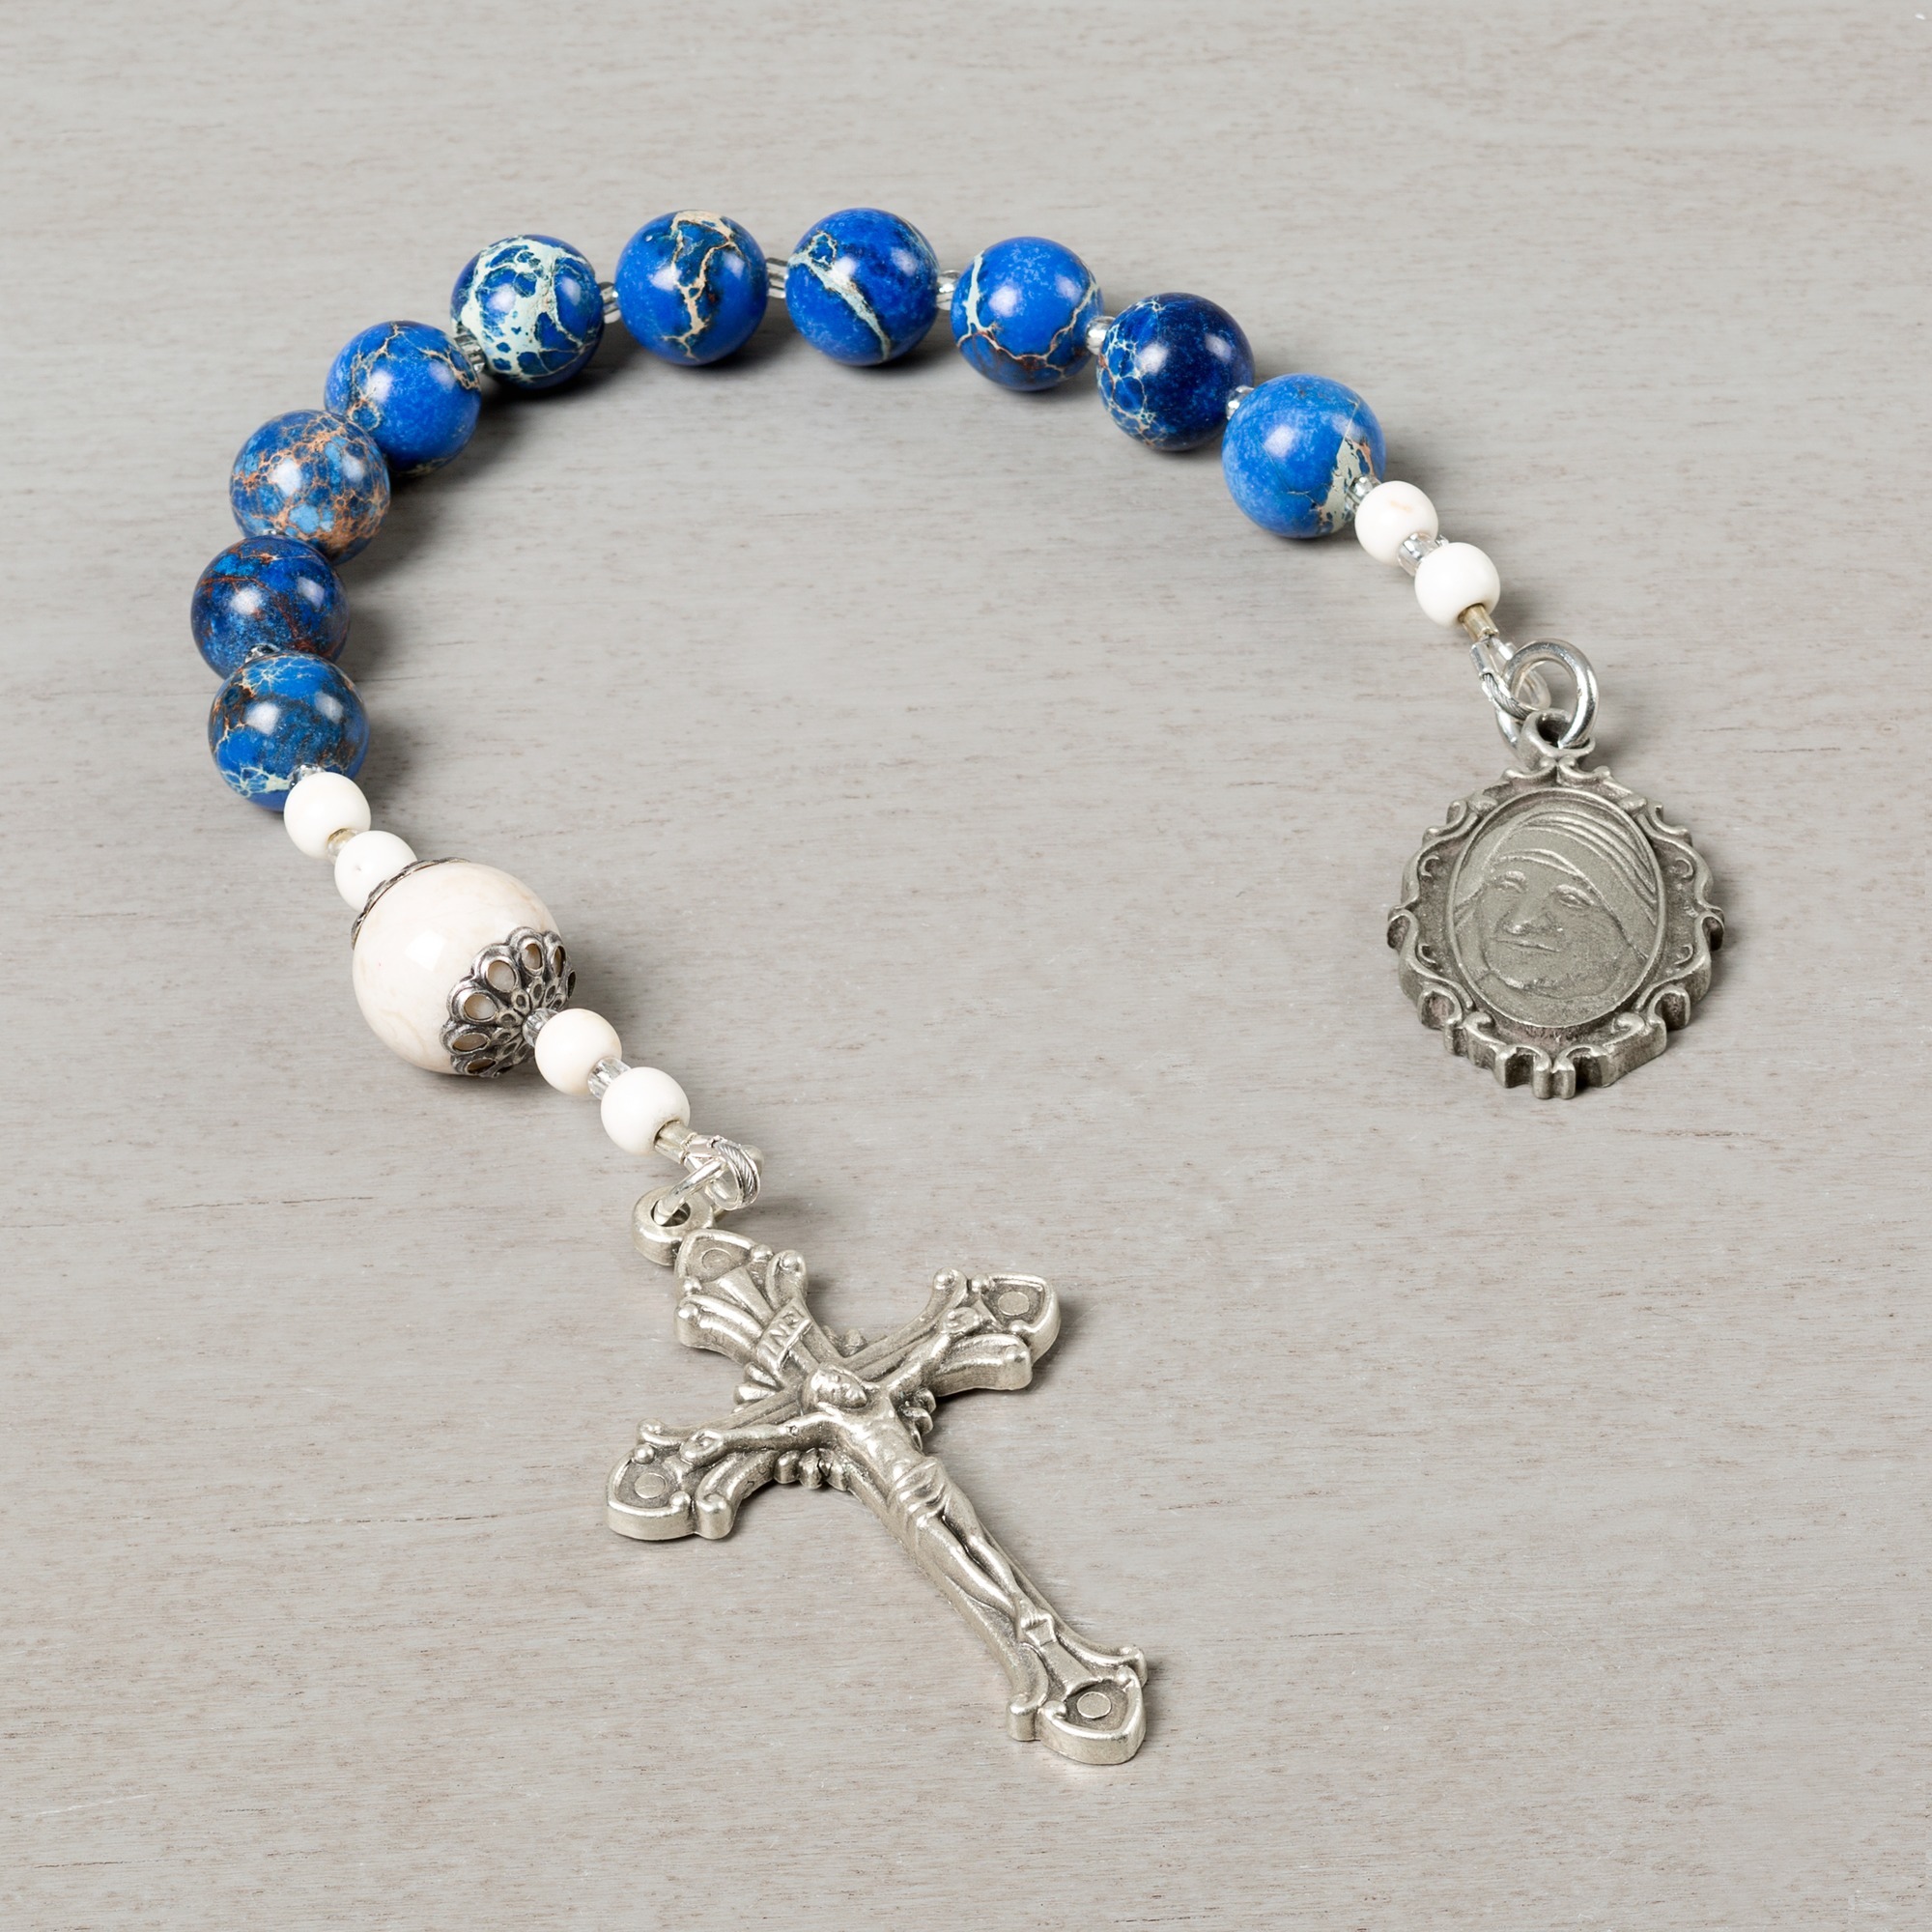 7 1/2 Inch May Birth Month Bead Rosary Bracelet with Patron Saint Petite Charm 